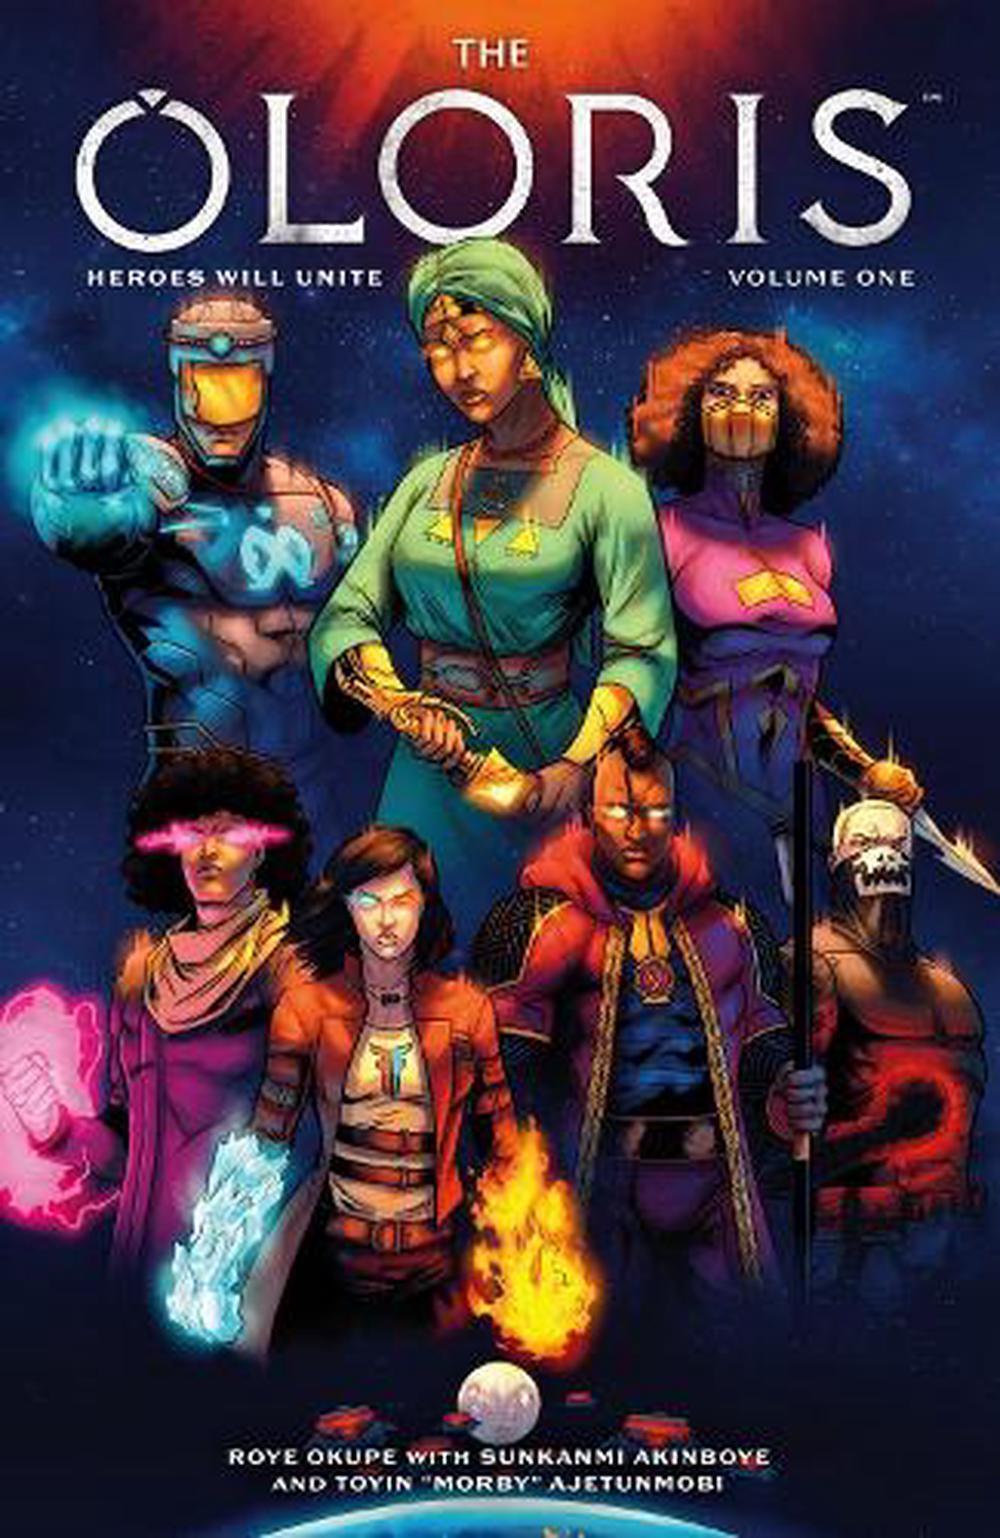 The Oloris: Heroes Will Unite Volume 1 by Roye Okupe (English) Paperback Book